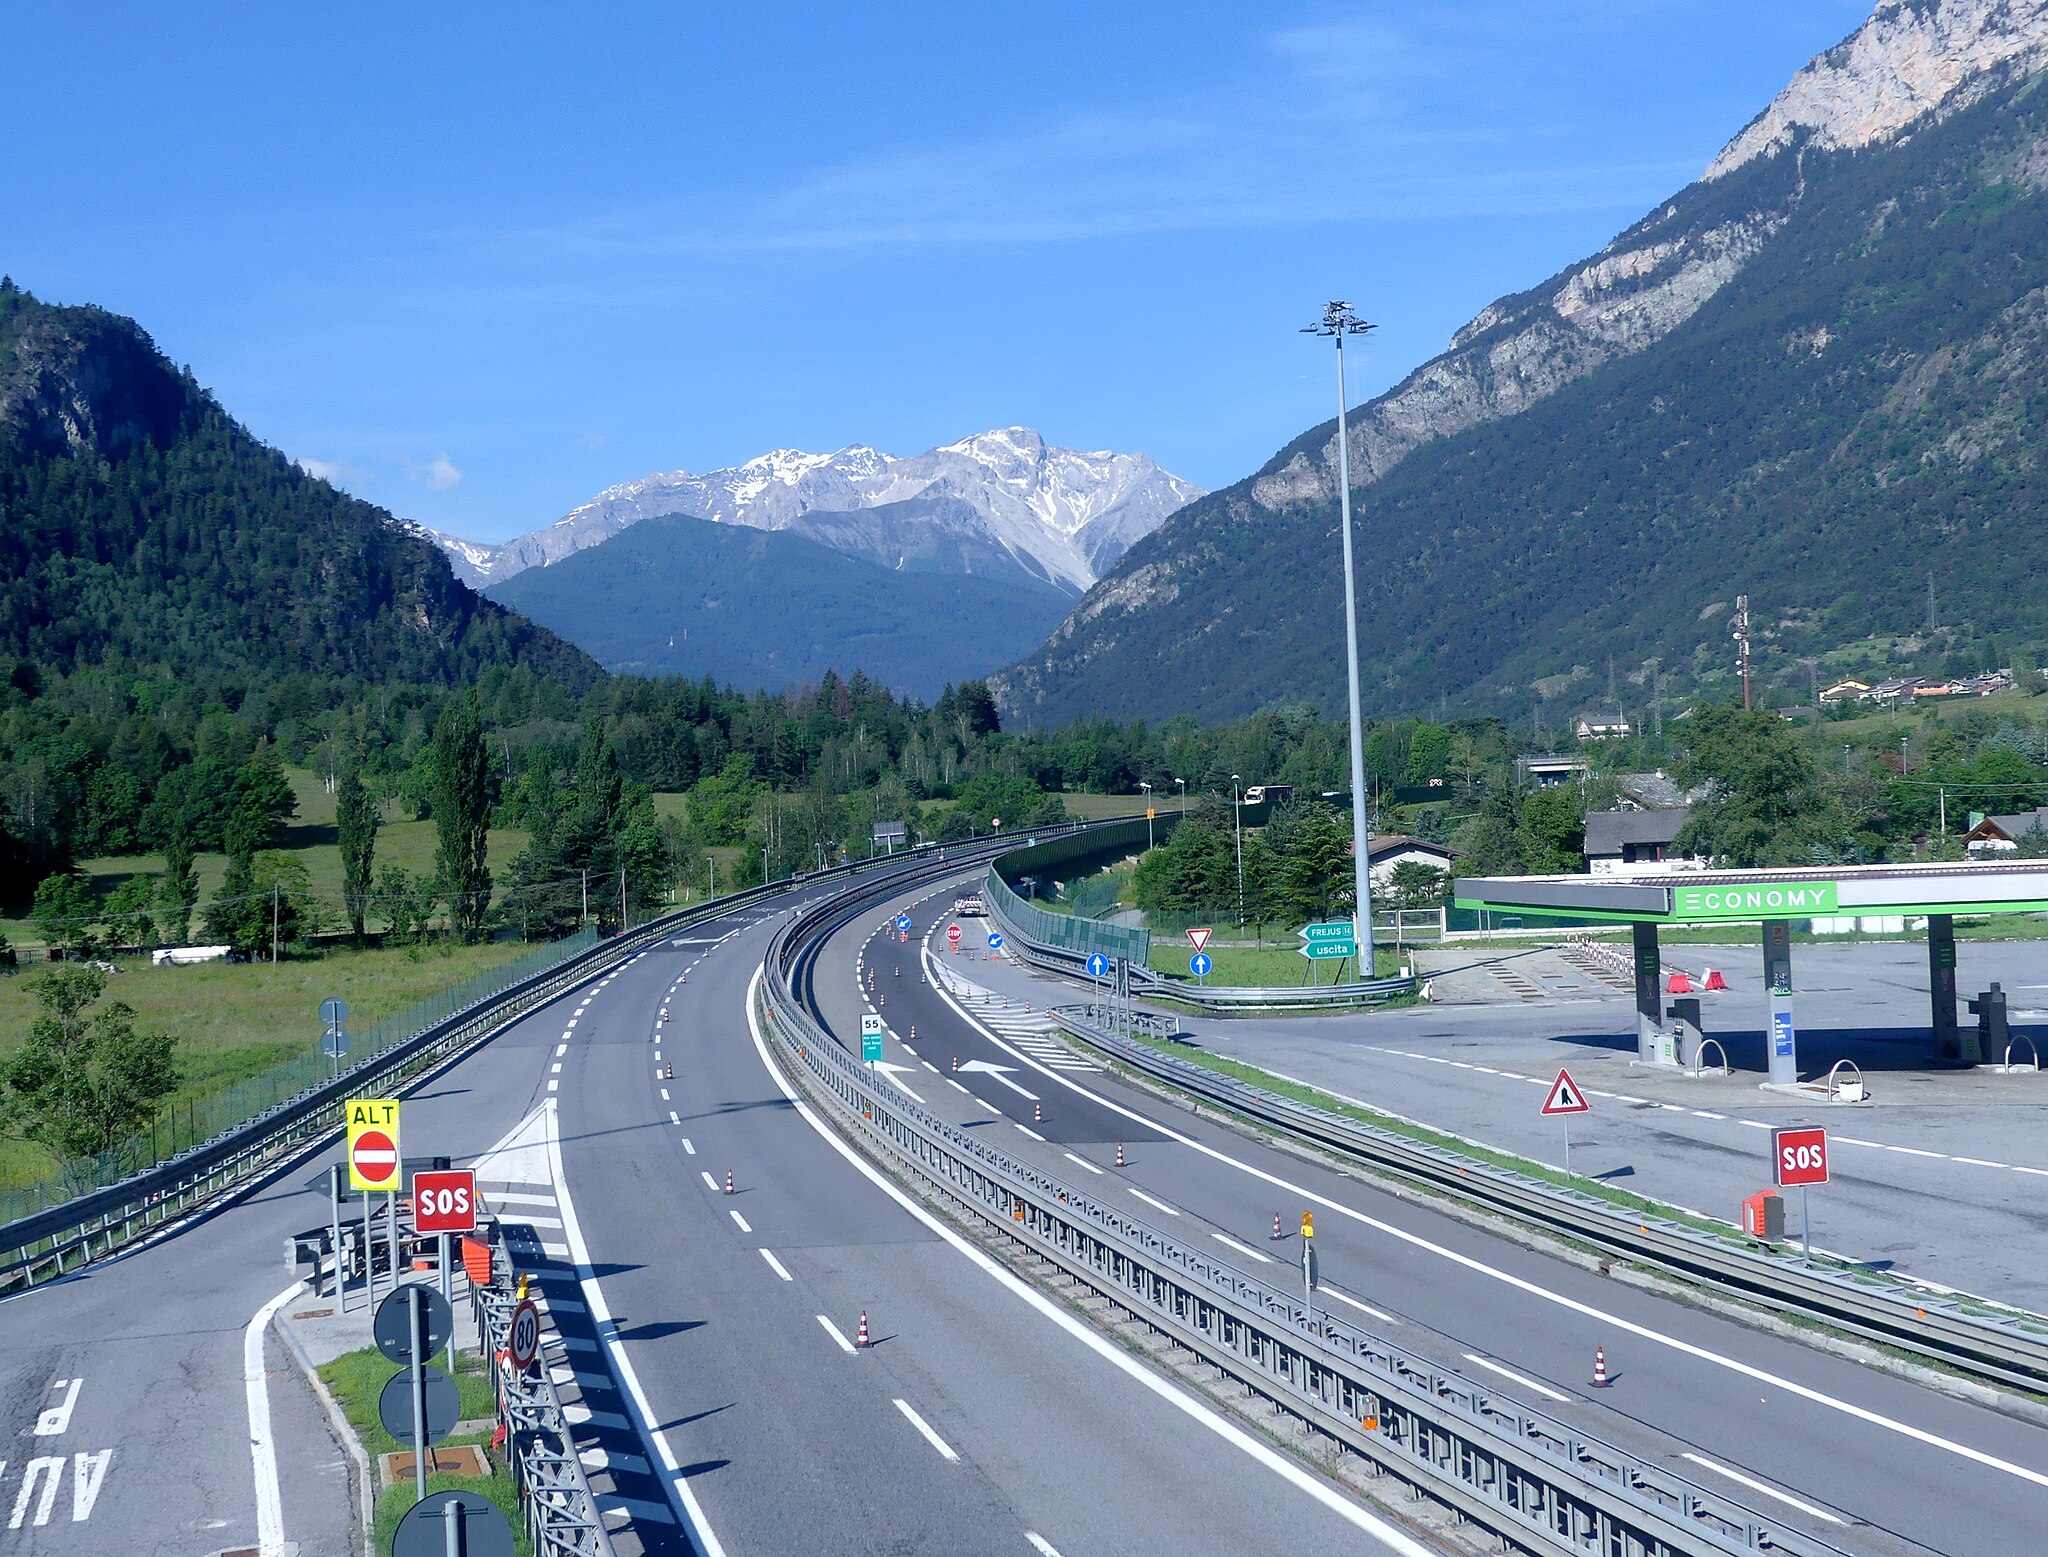 Italy secures €247 million for modernization and safety on A32 motorway